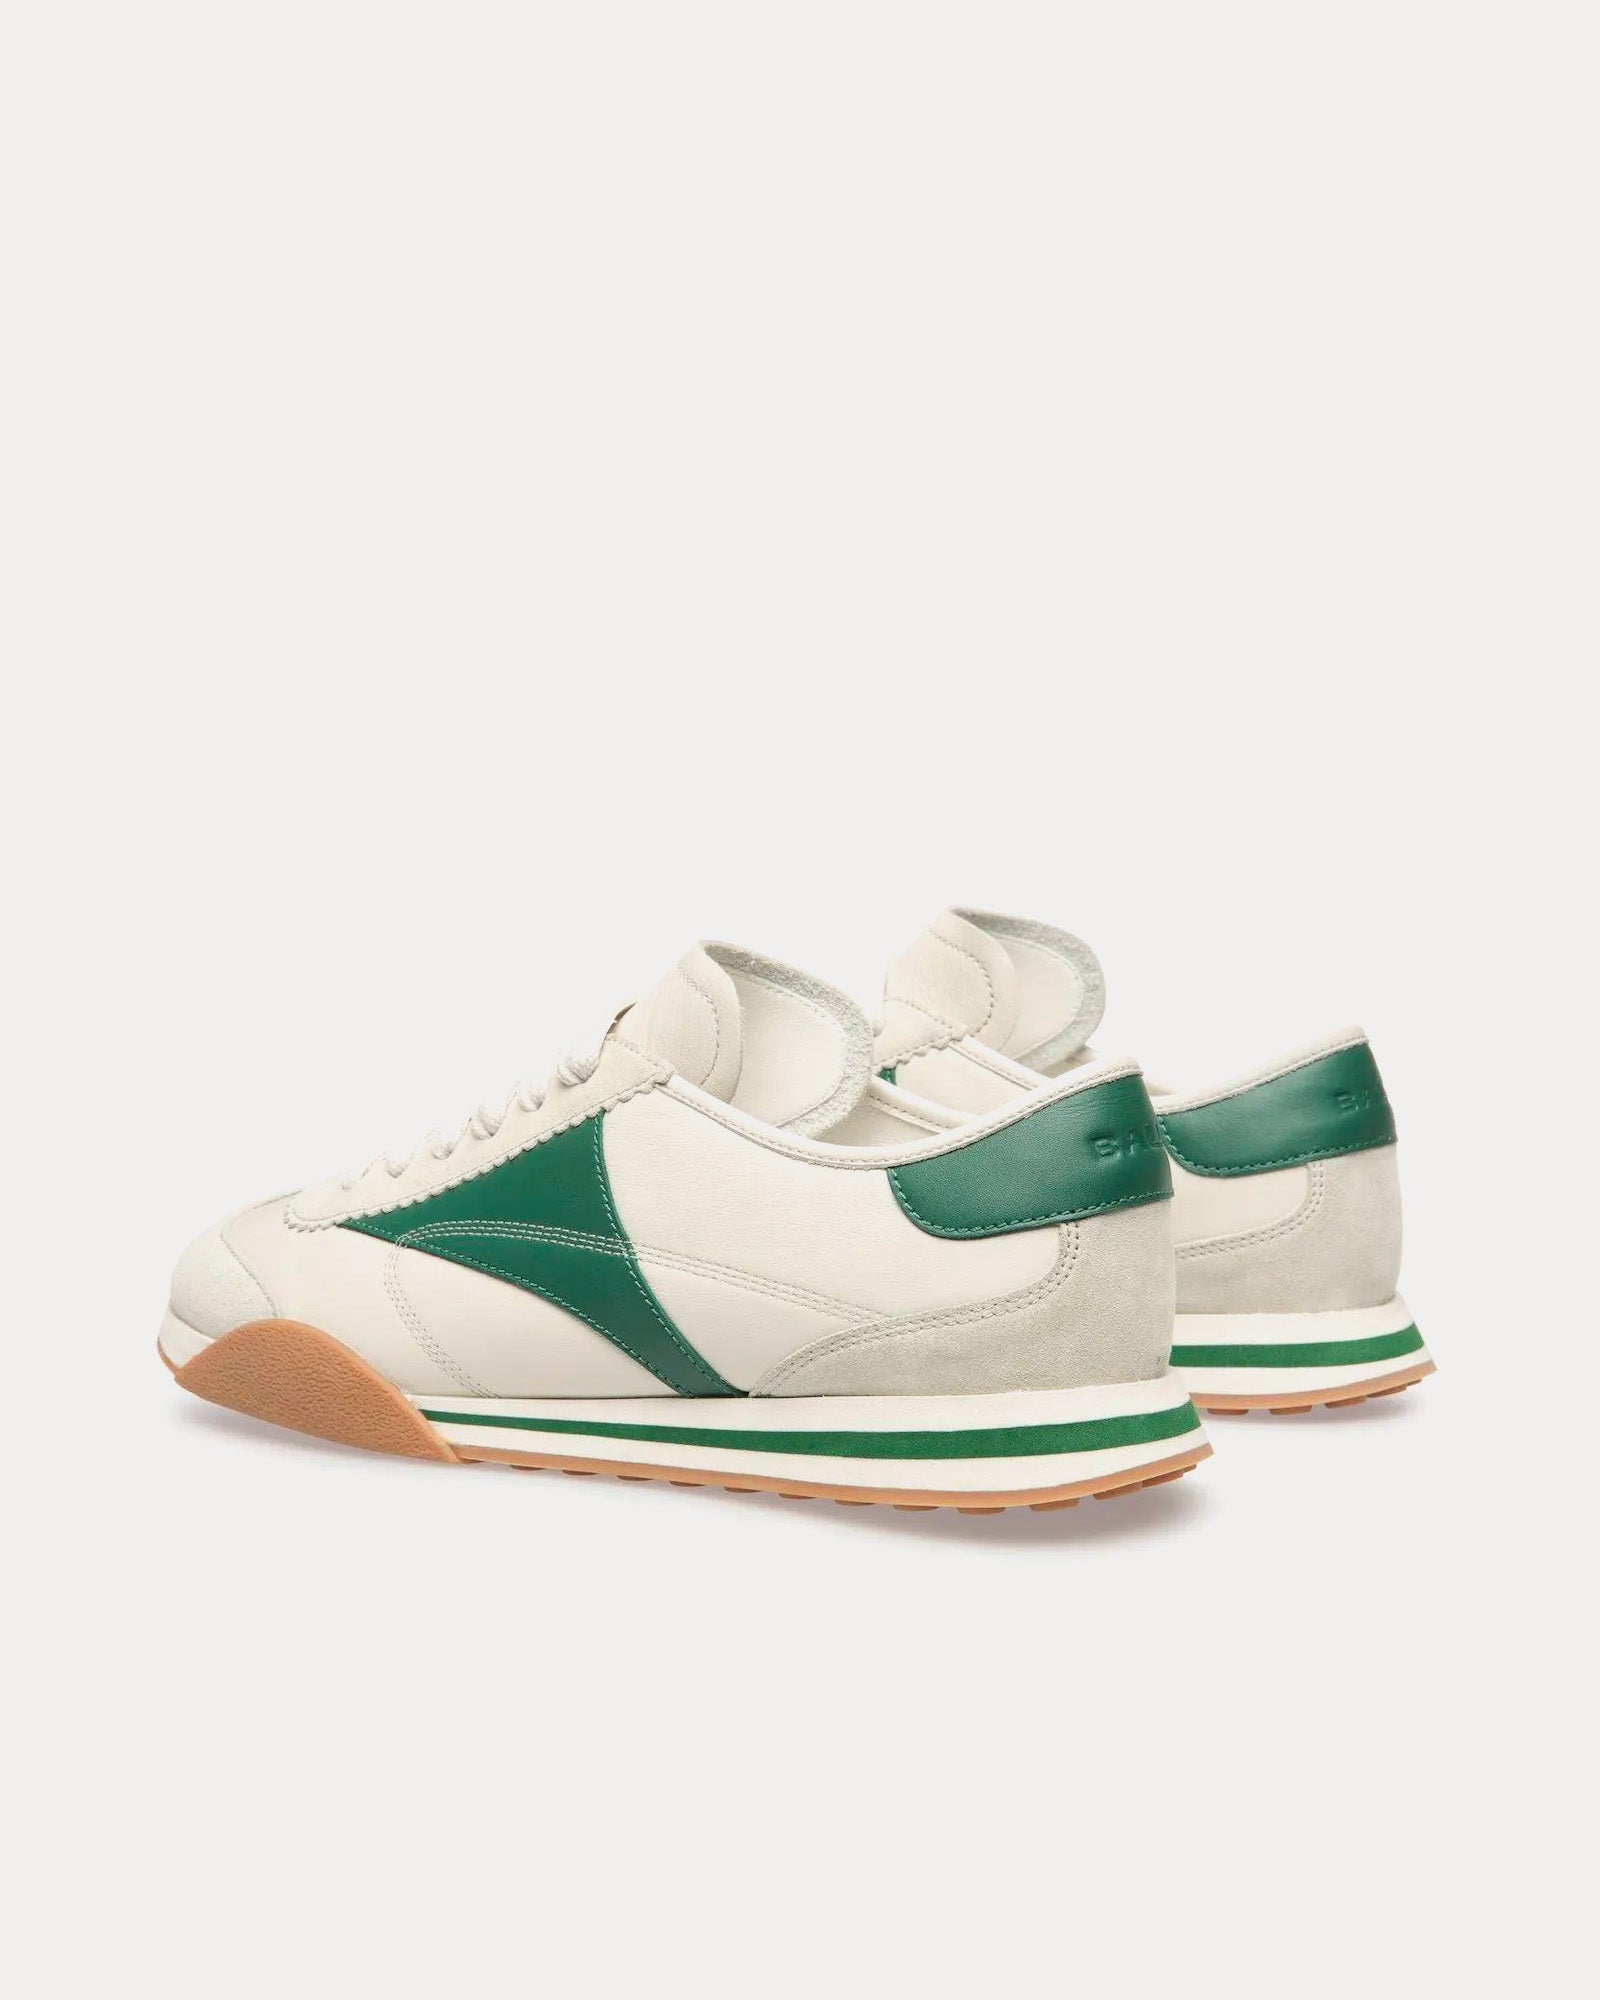 Bally - Sussex Leather & Fabric White / Green Low Top Sneakers